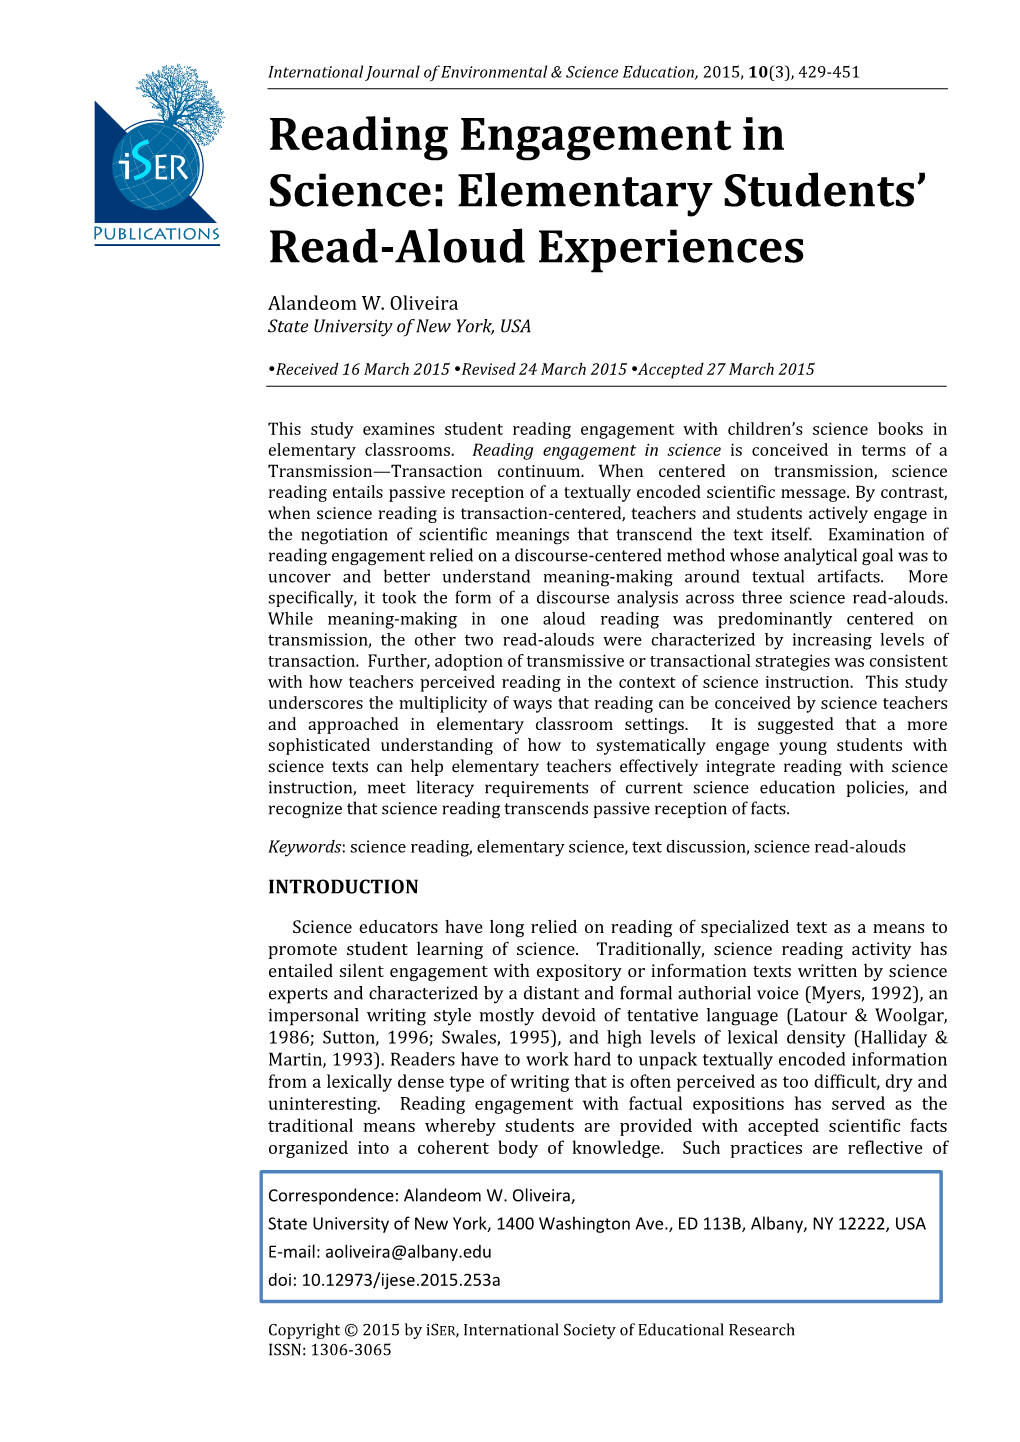 Reading Engagement in Science: Elementary Students’ Read-Aloud Experiences